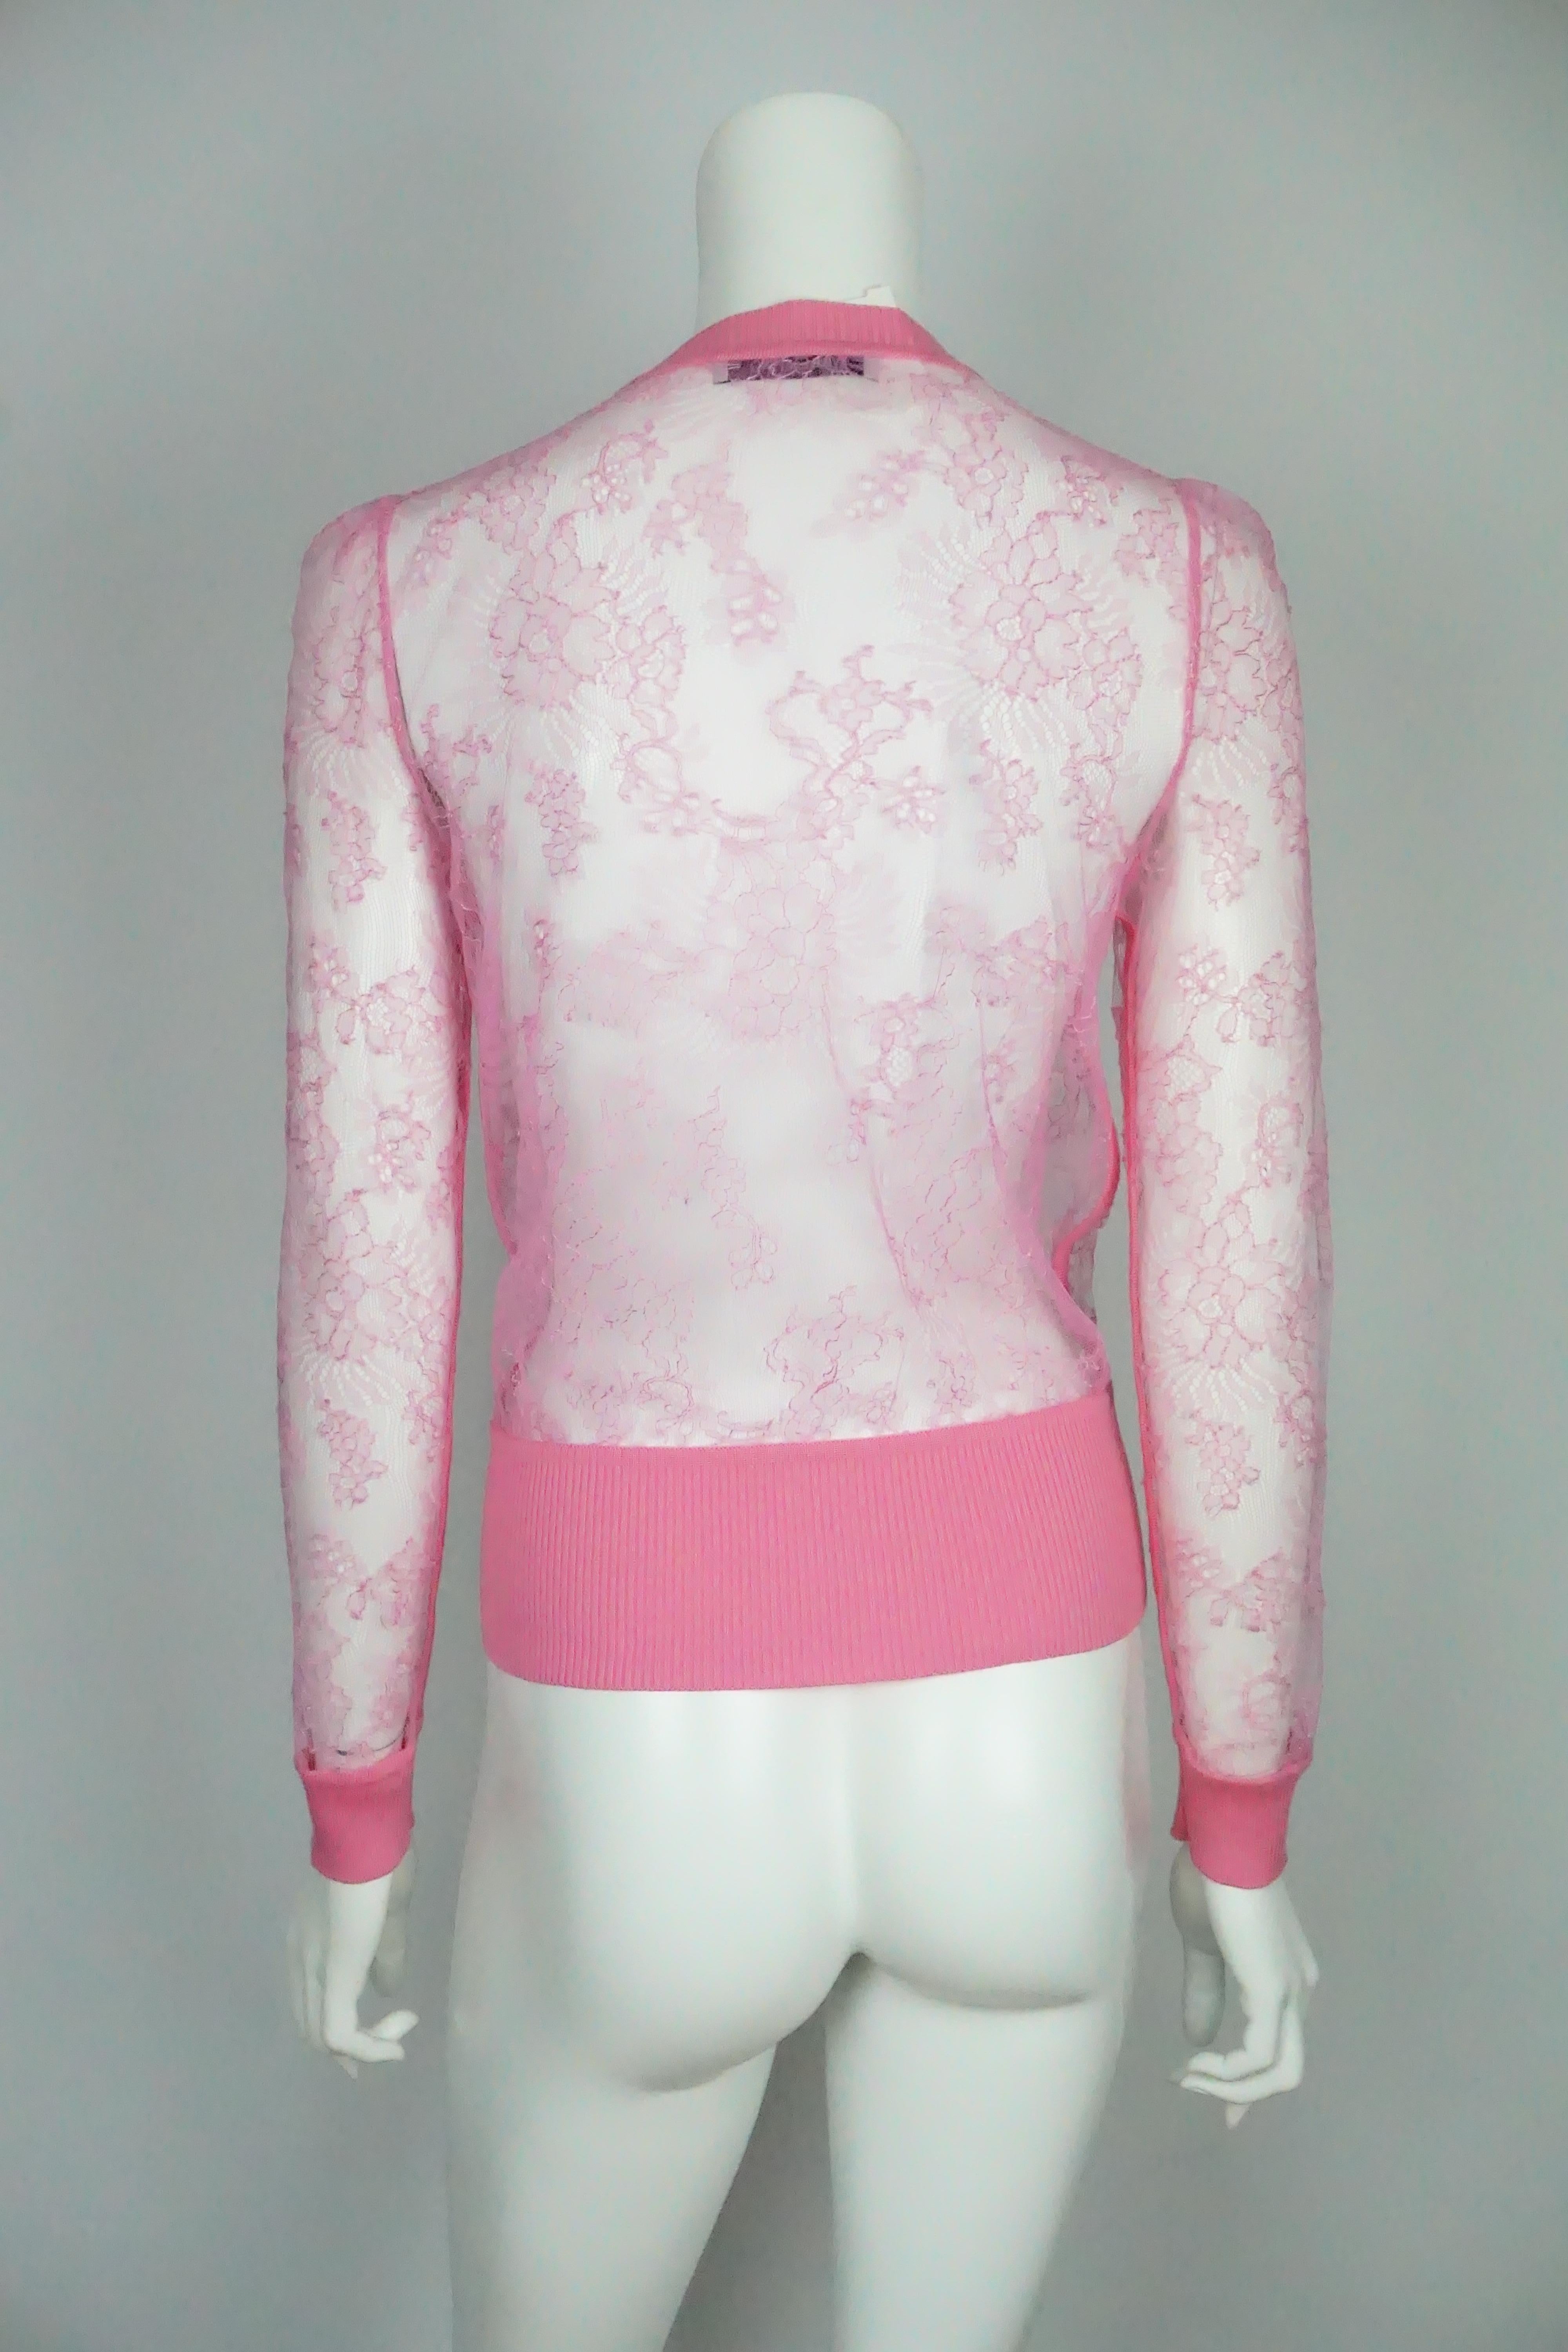 Beige Valentino Neon Pink Lace Sheer w/ Cotton Trim Cardigan - Small